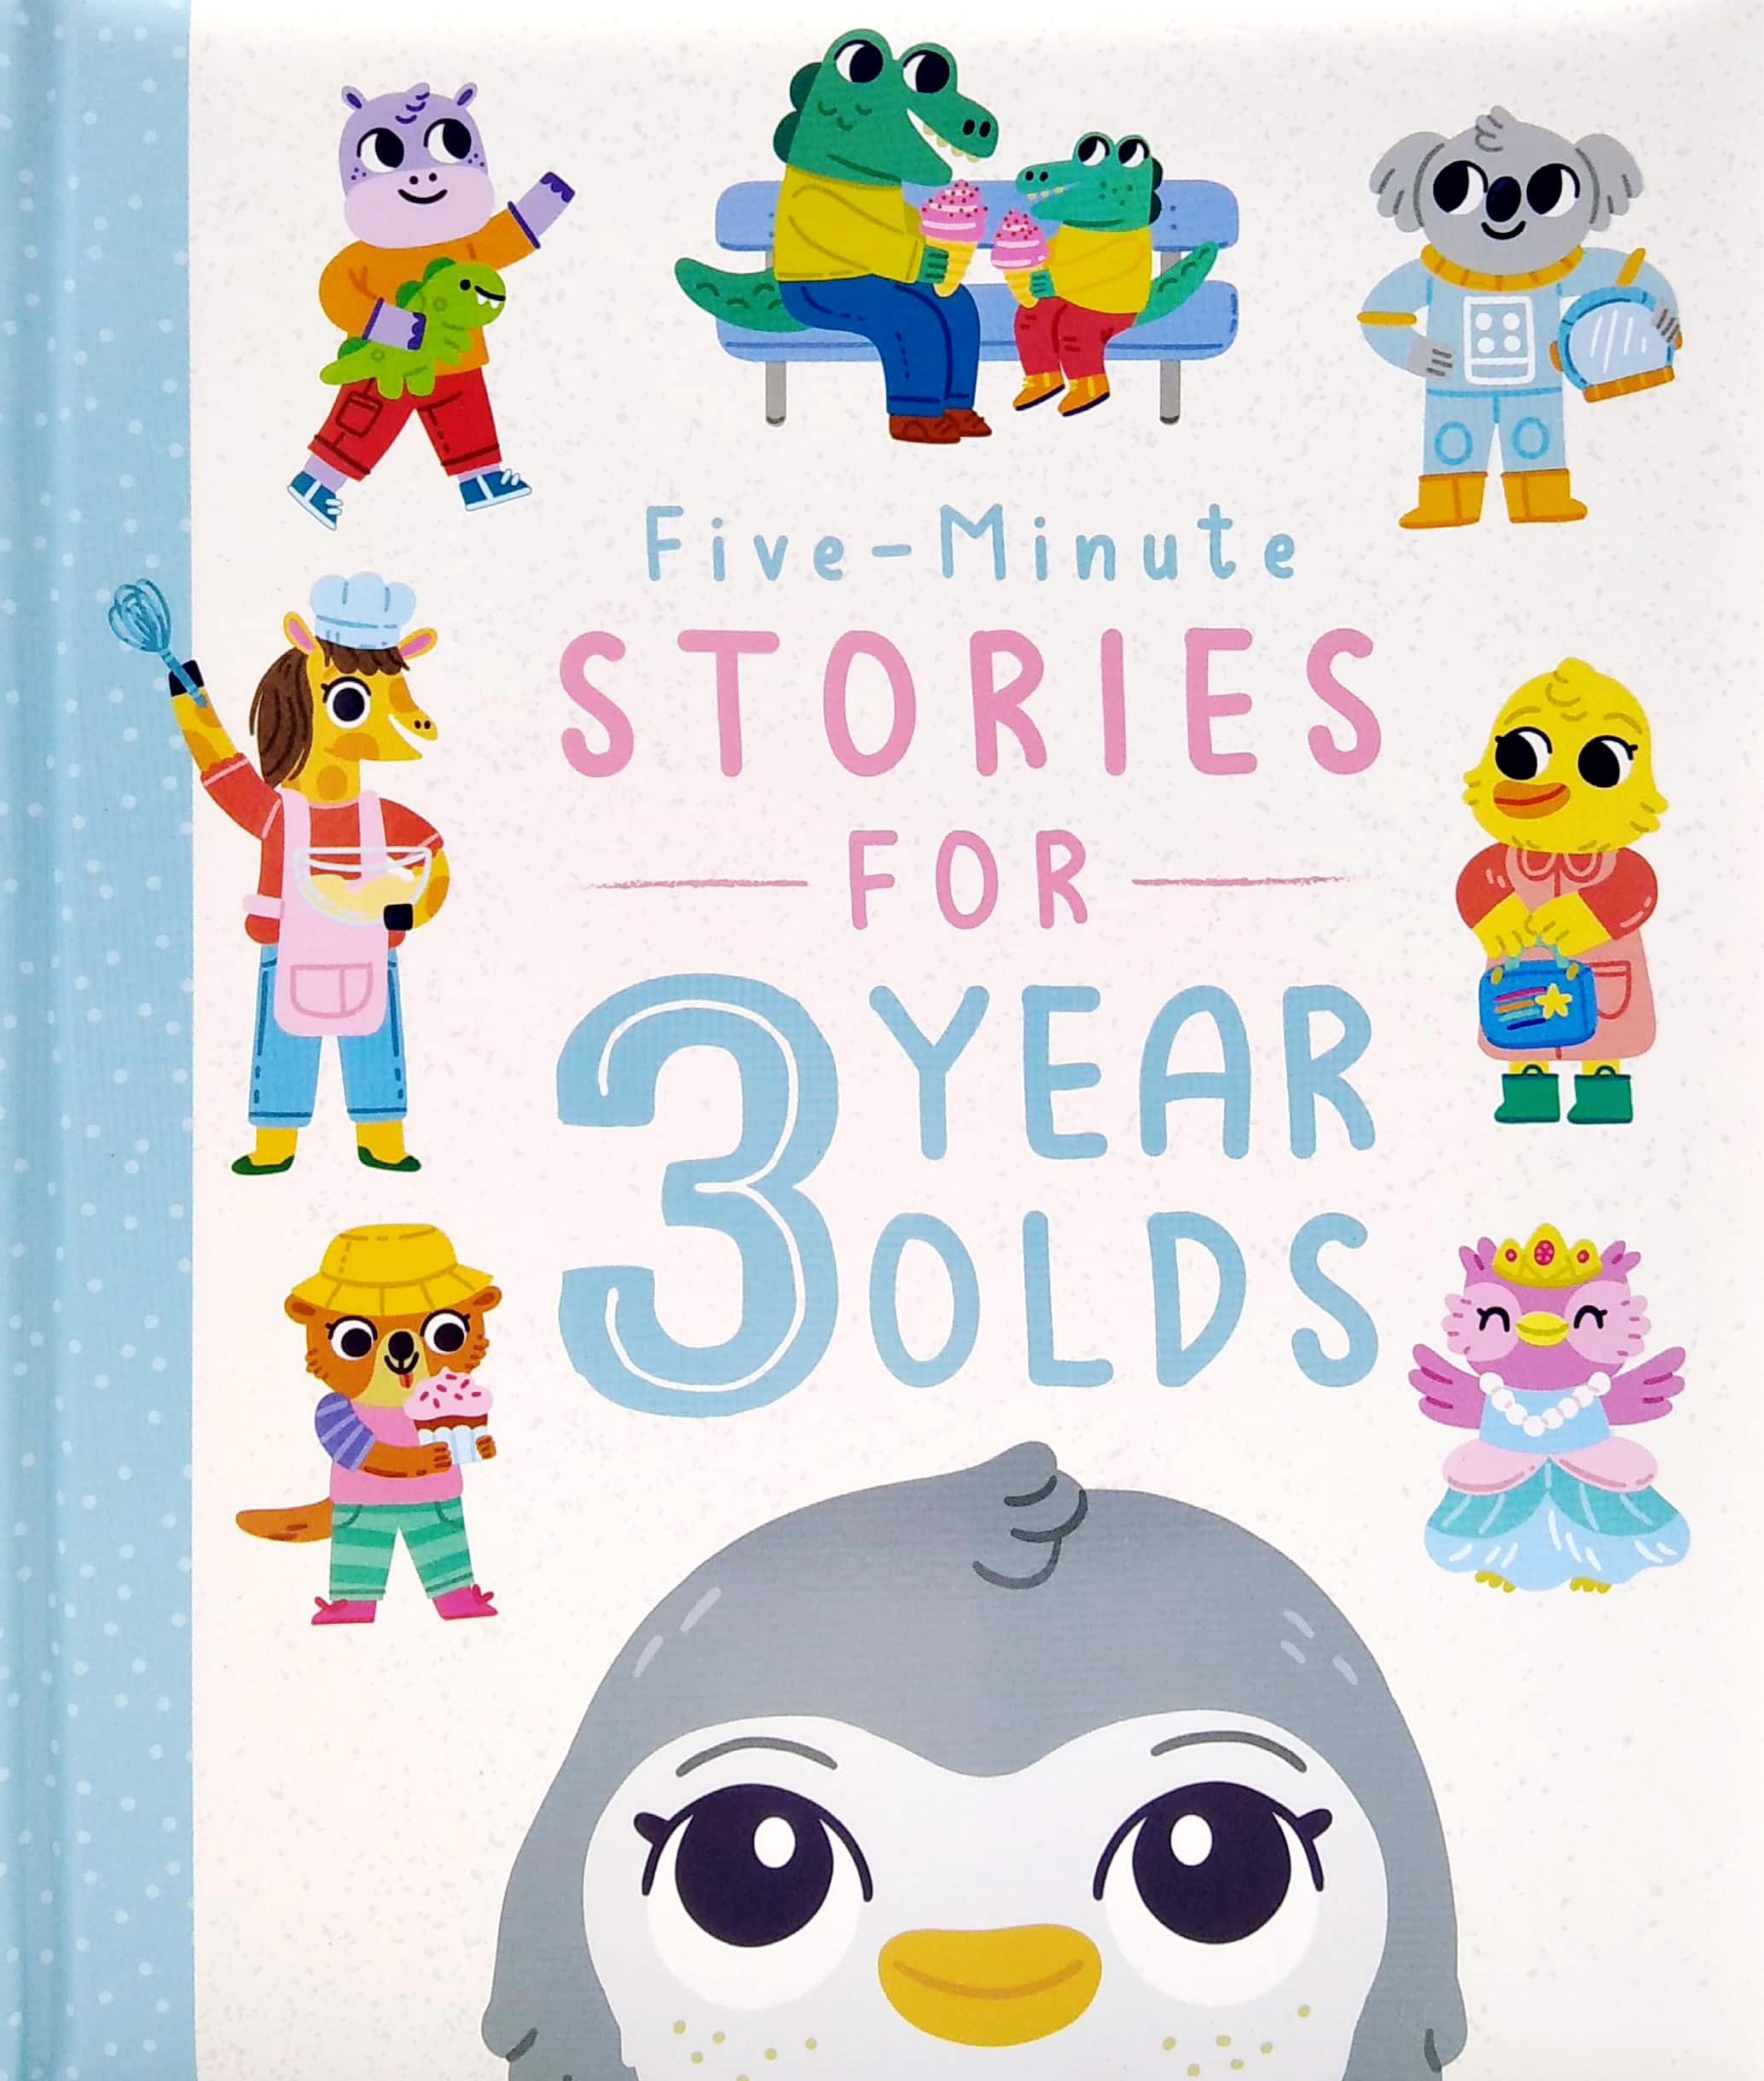 Five-Minute Stories For 3 Year Olds (Bedtime Story Collection)